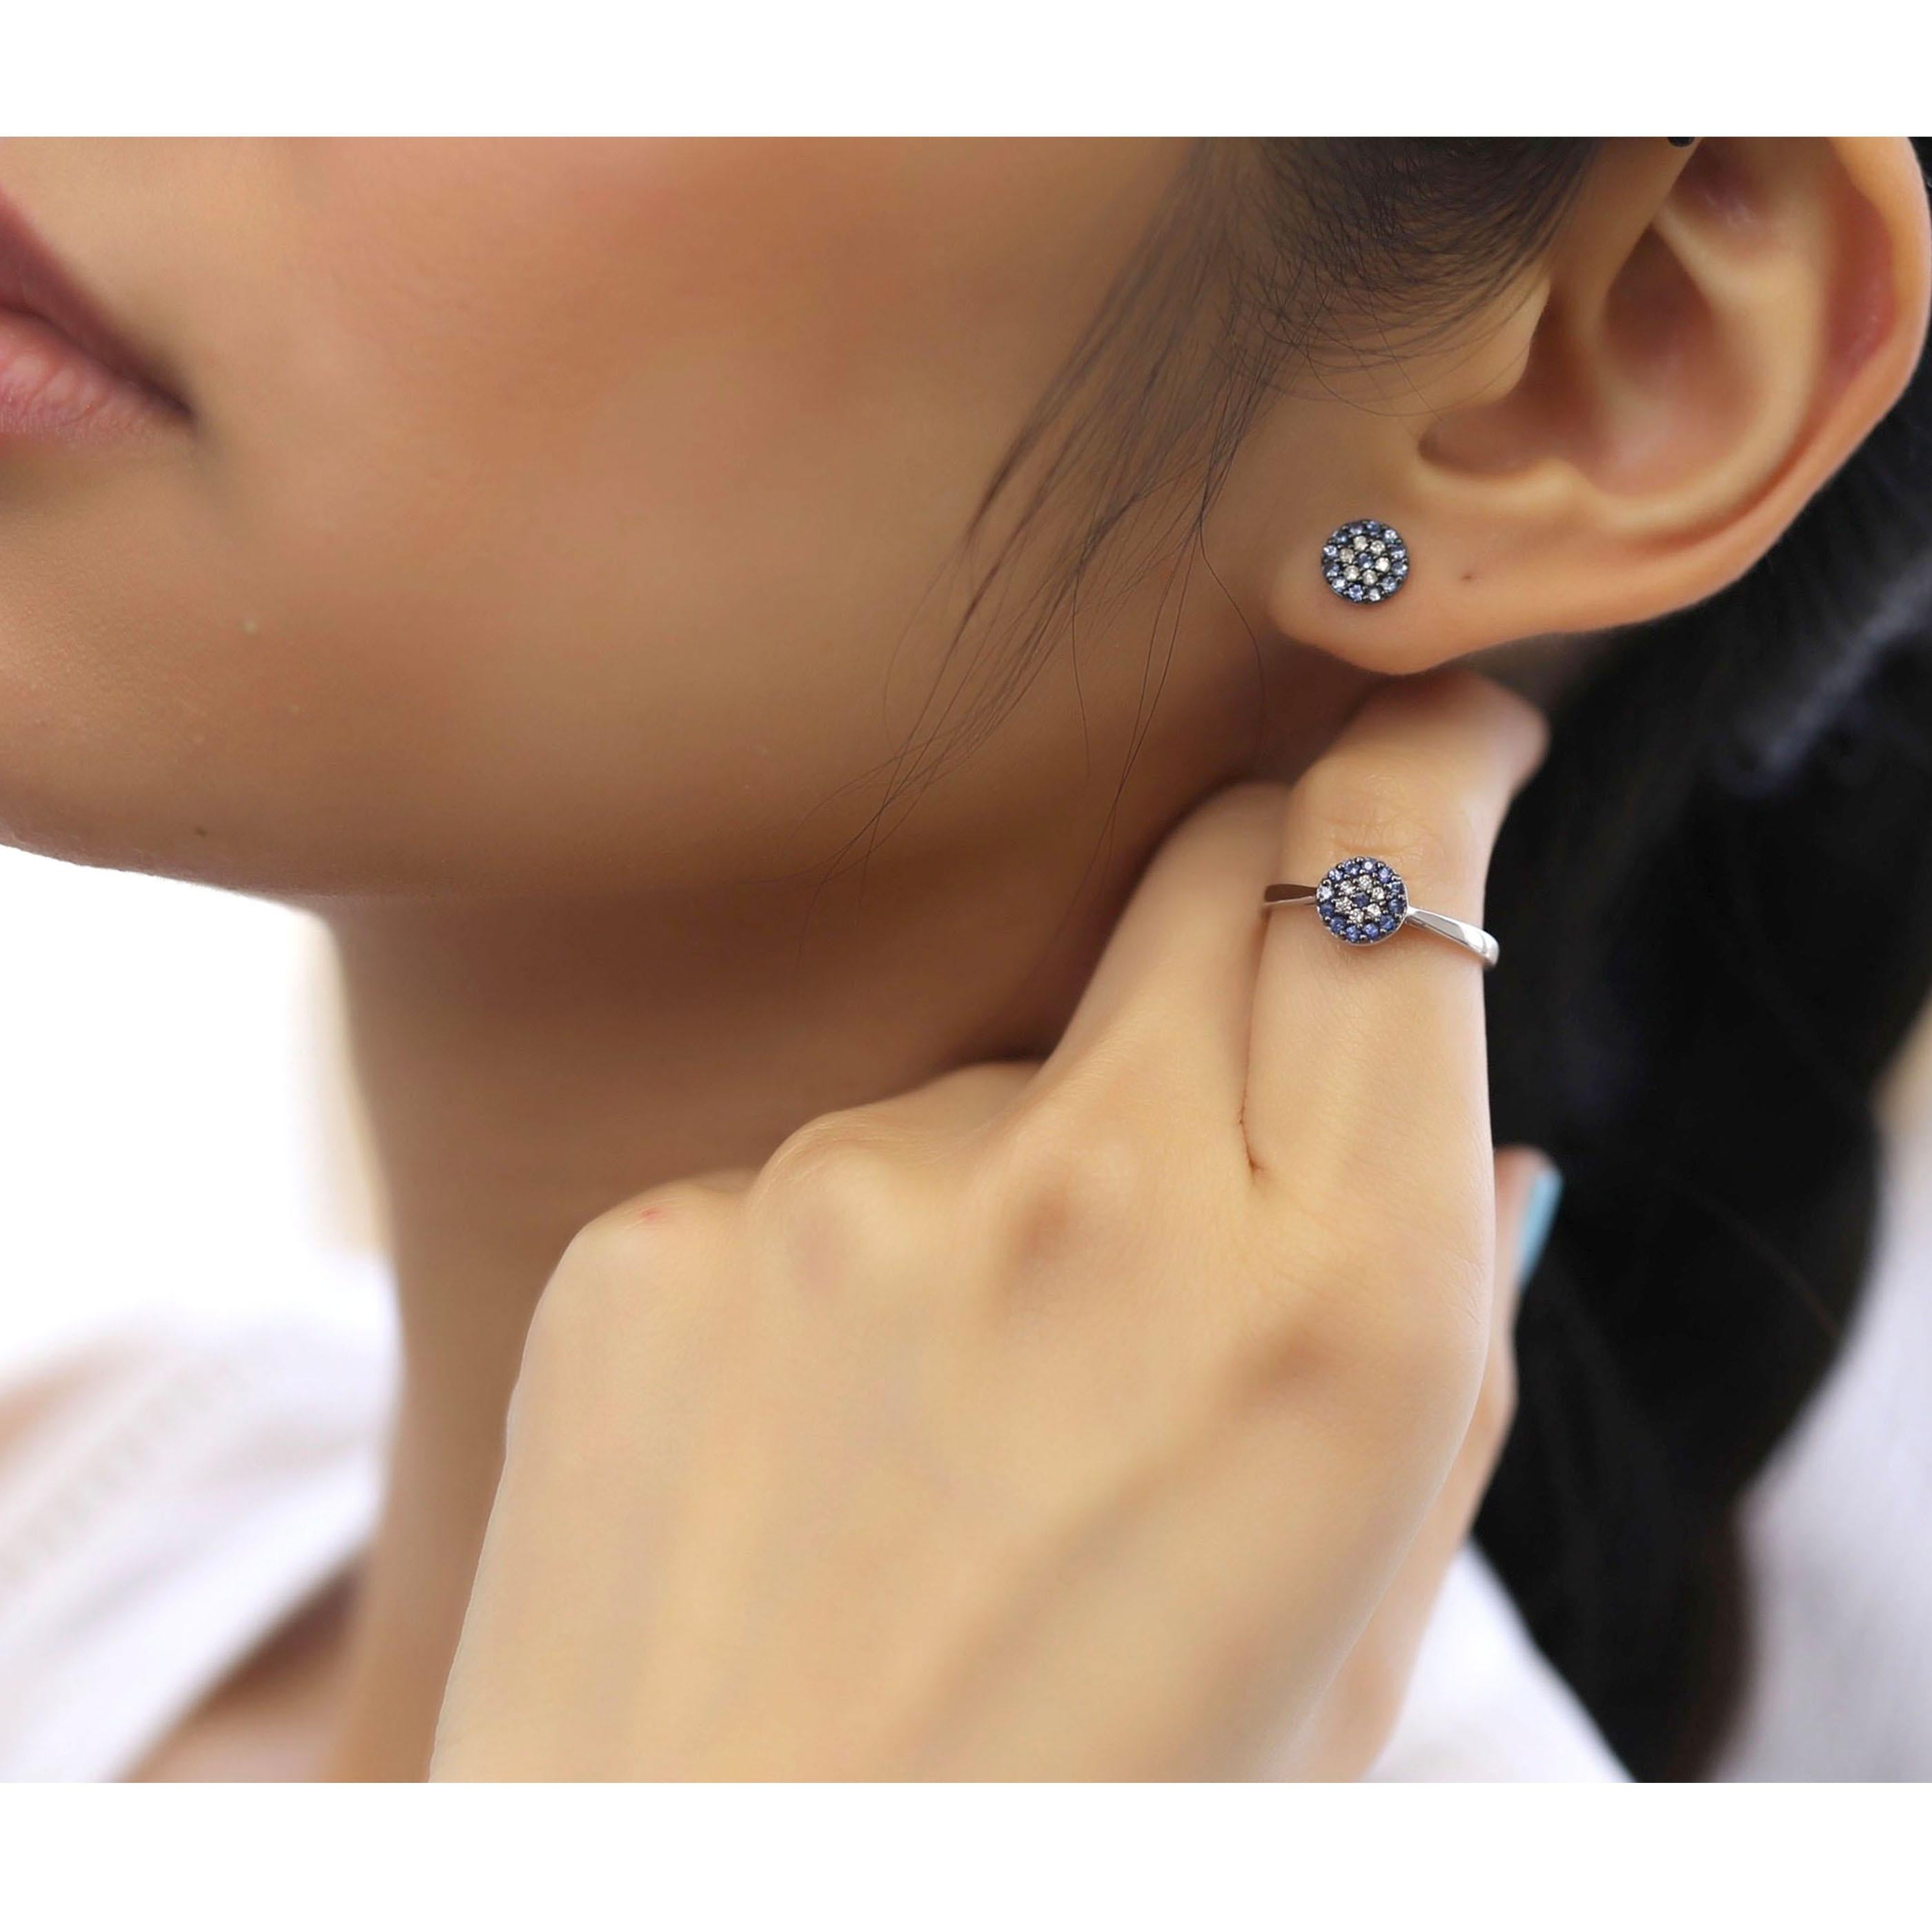 This small flat flower earring and ring set is crafted in 18-karat white gold, weighing approximately 0.14 total carats of SI-H Quality white diamonds and 0.35 total carats of sapphire stones. The ring is comfortable and can be sized 